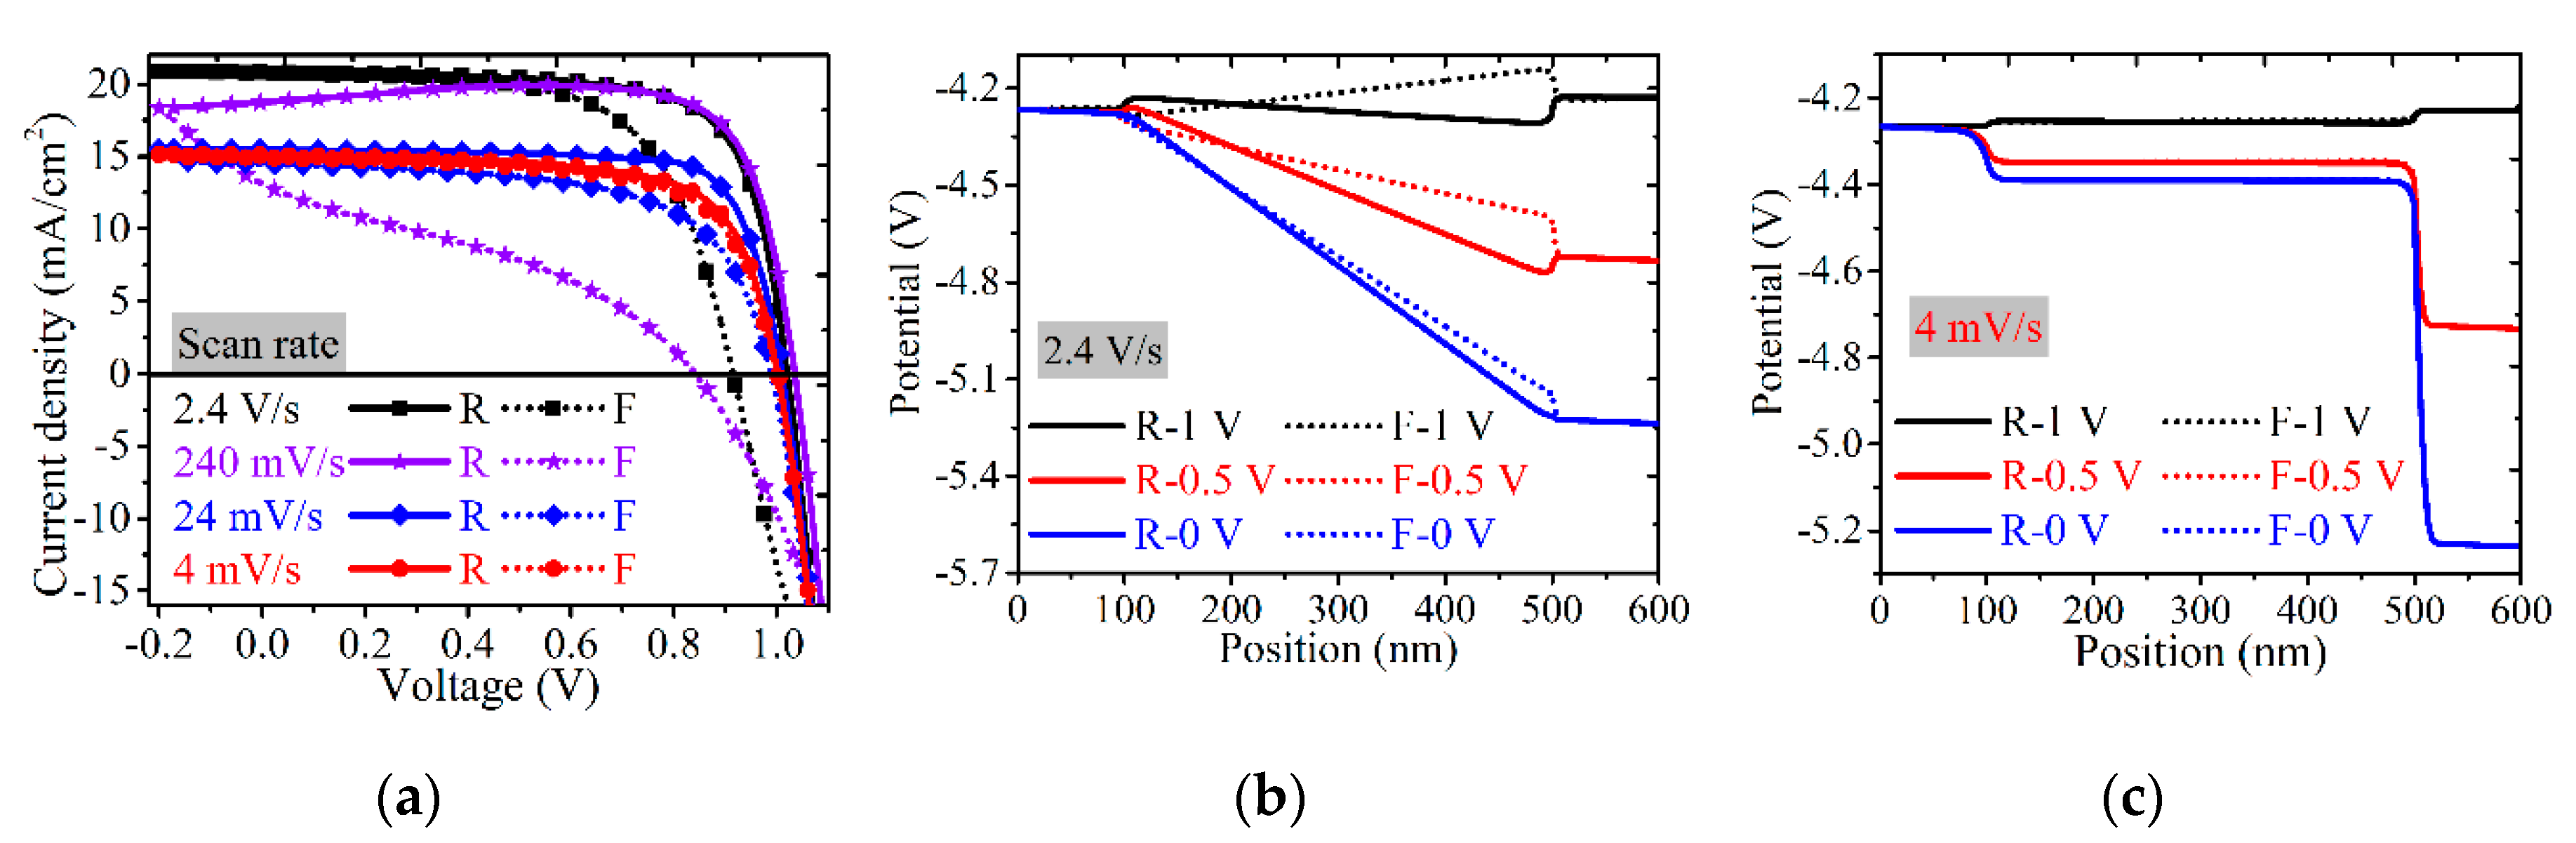 Photonics Free Full Text Insights Of Hysteresis Behaviors In Perovskite Solar Cells From A Mixed Drift Diffusion Model Coupled With Recombination Html